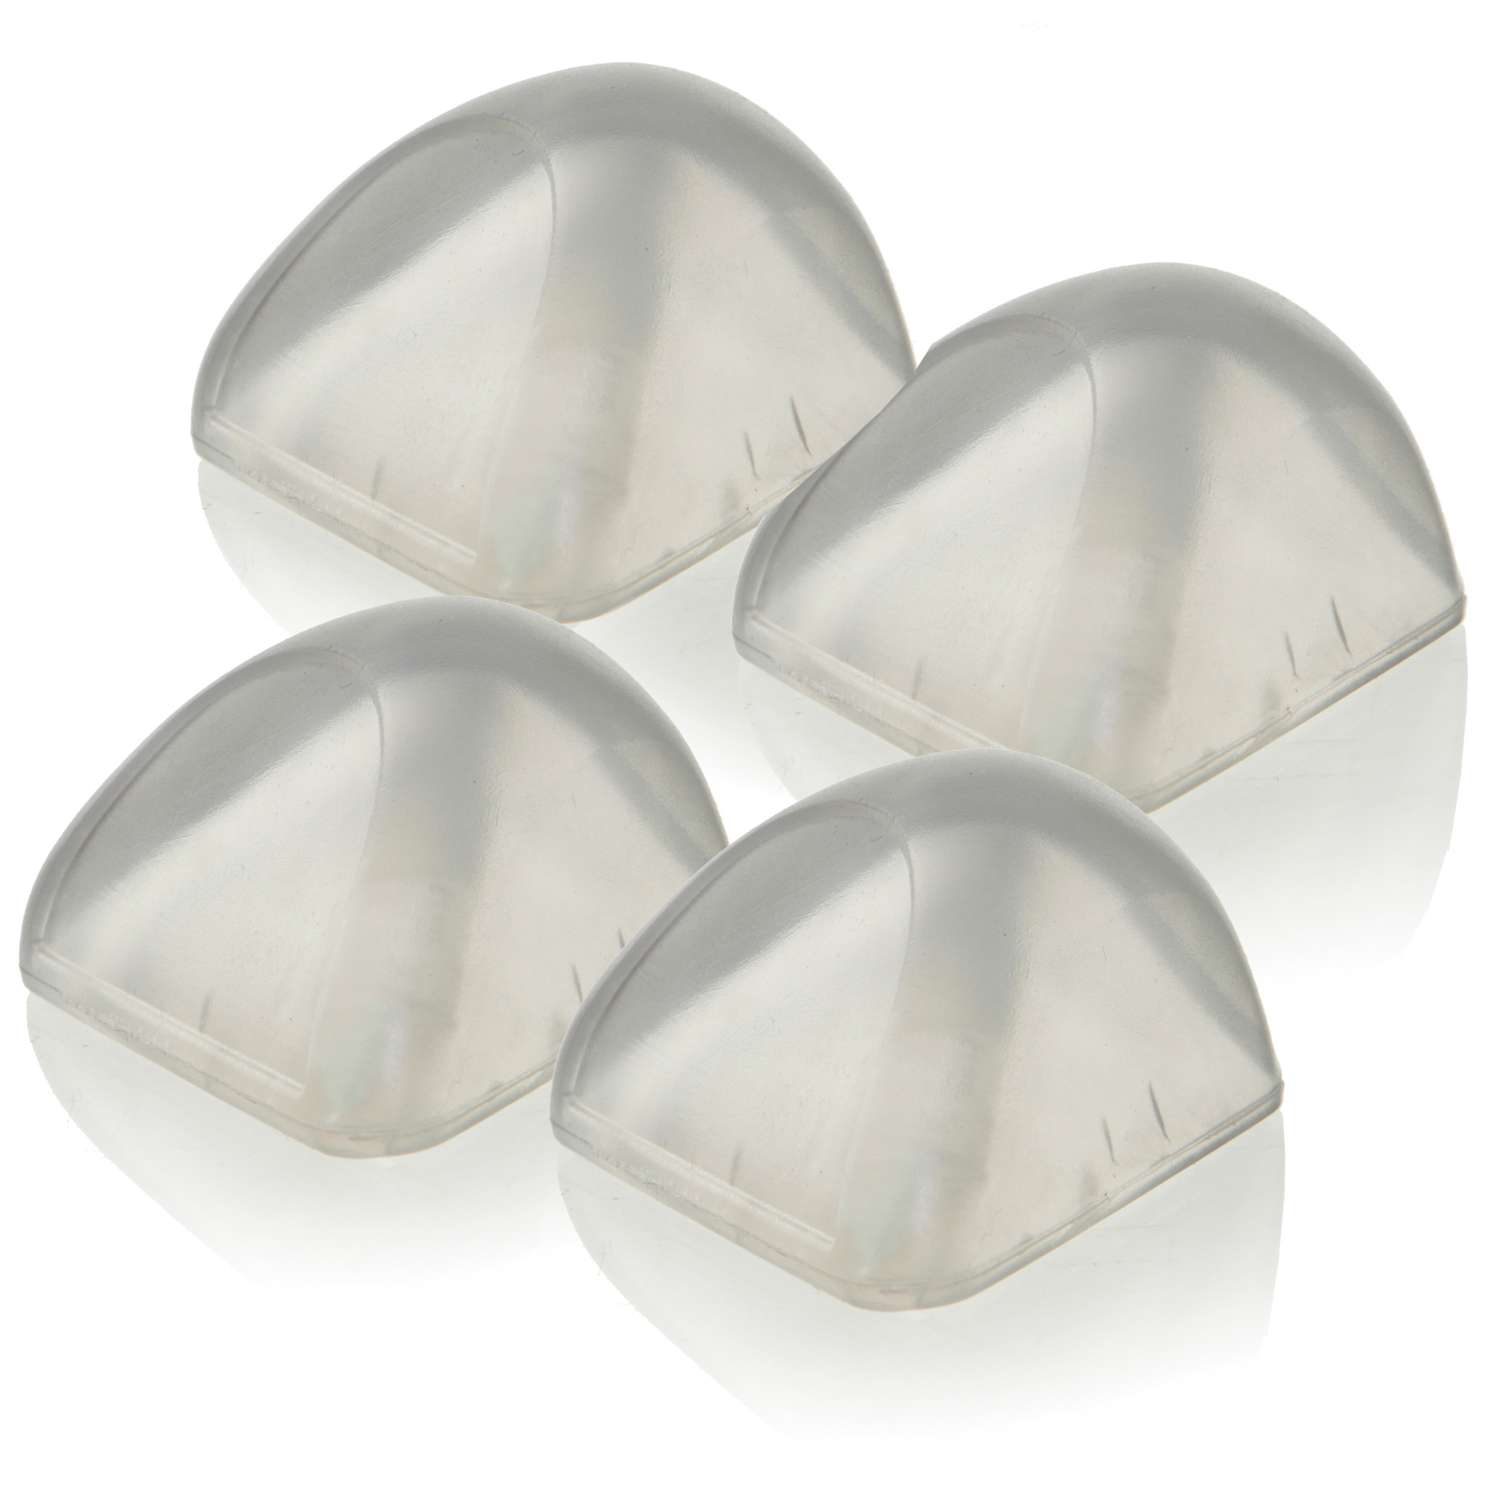 DREAMBABY EZY-FIT CLEAR PLASTIC DOOR KNOB COVERS 3 PK - The Shoppes at  Steve's Ace Home & Garden